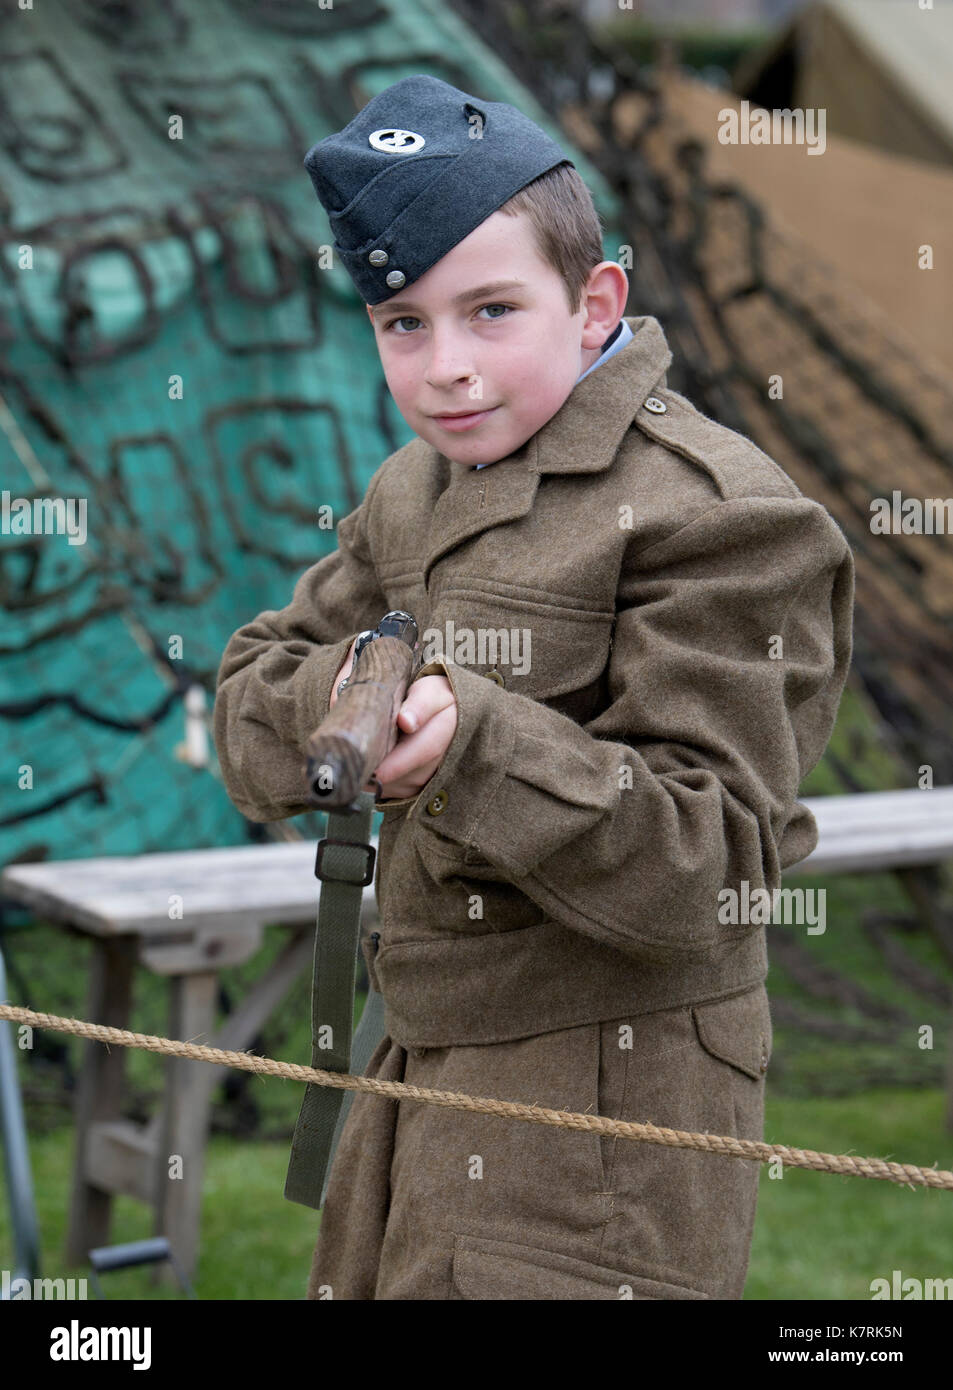 Chatham, Kent, UK. 17 September 2017. 10 year old War time family member Lance Taylor Dean stands guard, he is a members of the Barmy Army Film Club, making Dad’s Army inspired films, today bringing the past to life with 1940s period dress and world war 2 era cars and planes at the Salute to the 40’s Vintage Weekend at Chatham Historic Dockyard. © Matthew Richardson/Alamy Live News Stock Photo